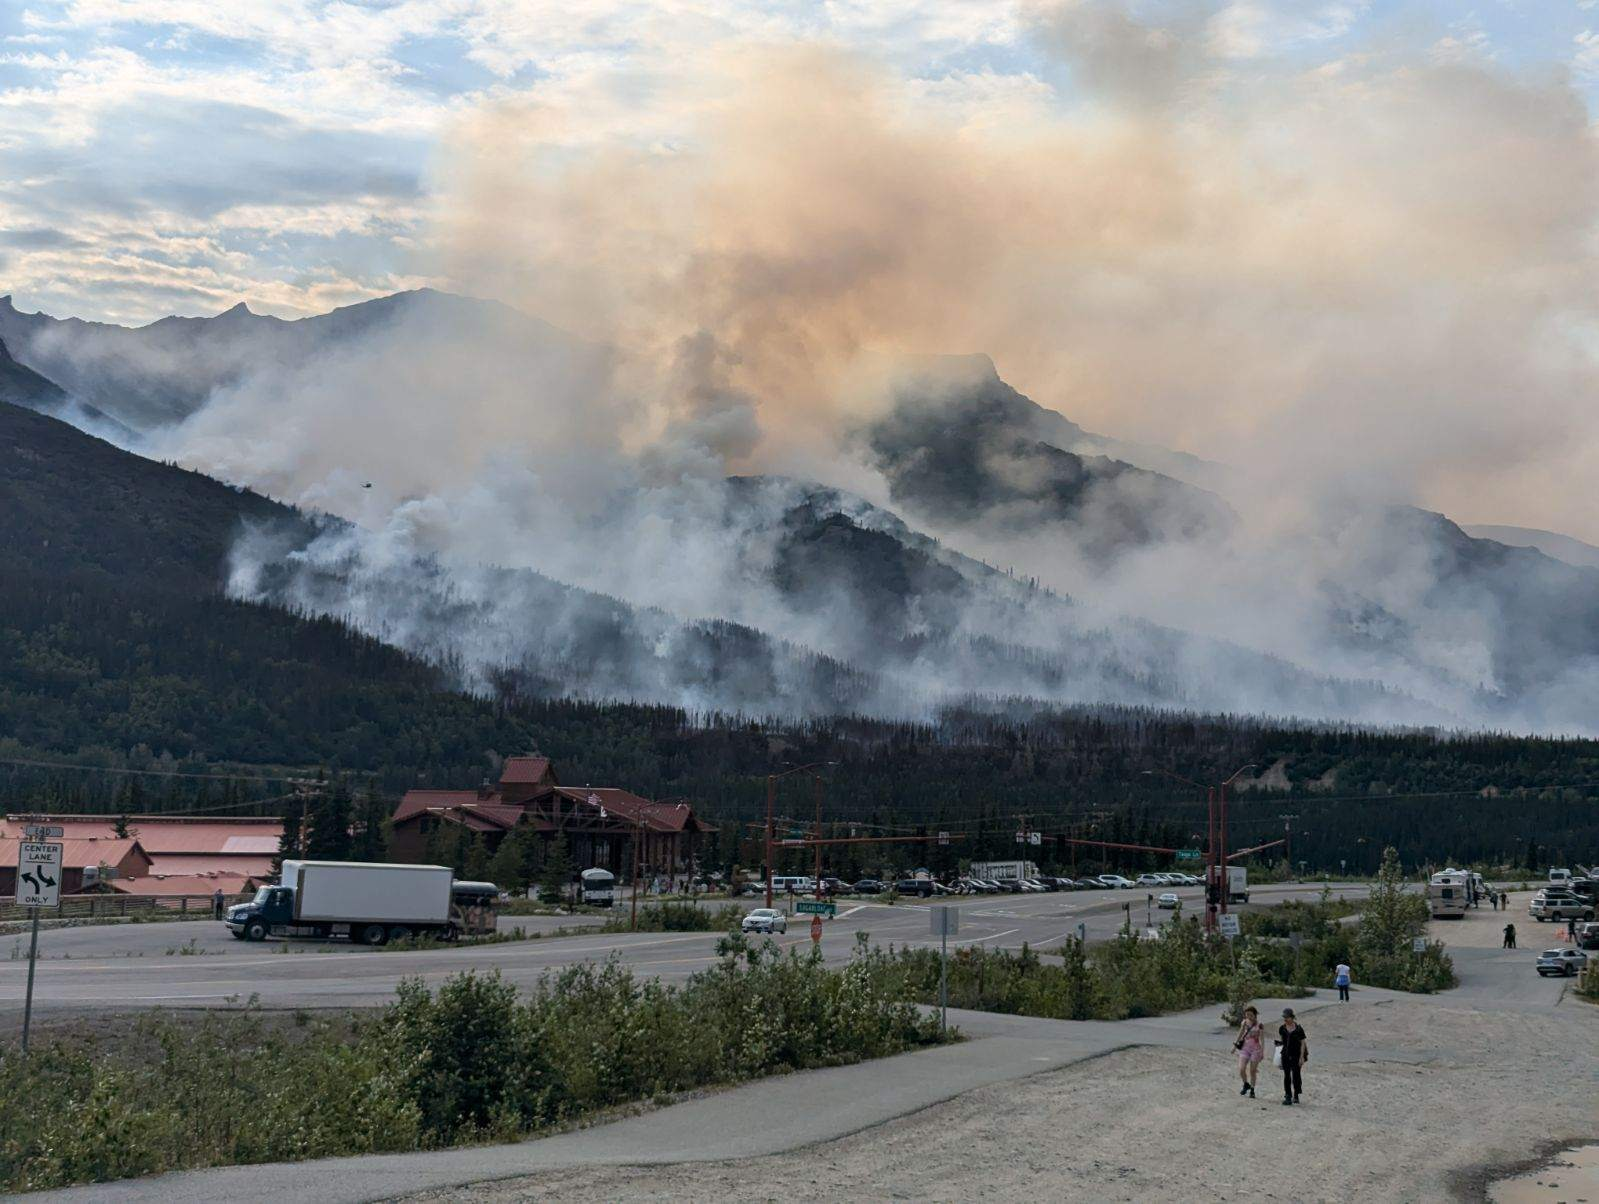 Wildfire smoke rises from forested mountains near a commercial area with buildings, roads, and pedestrians.